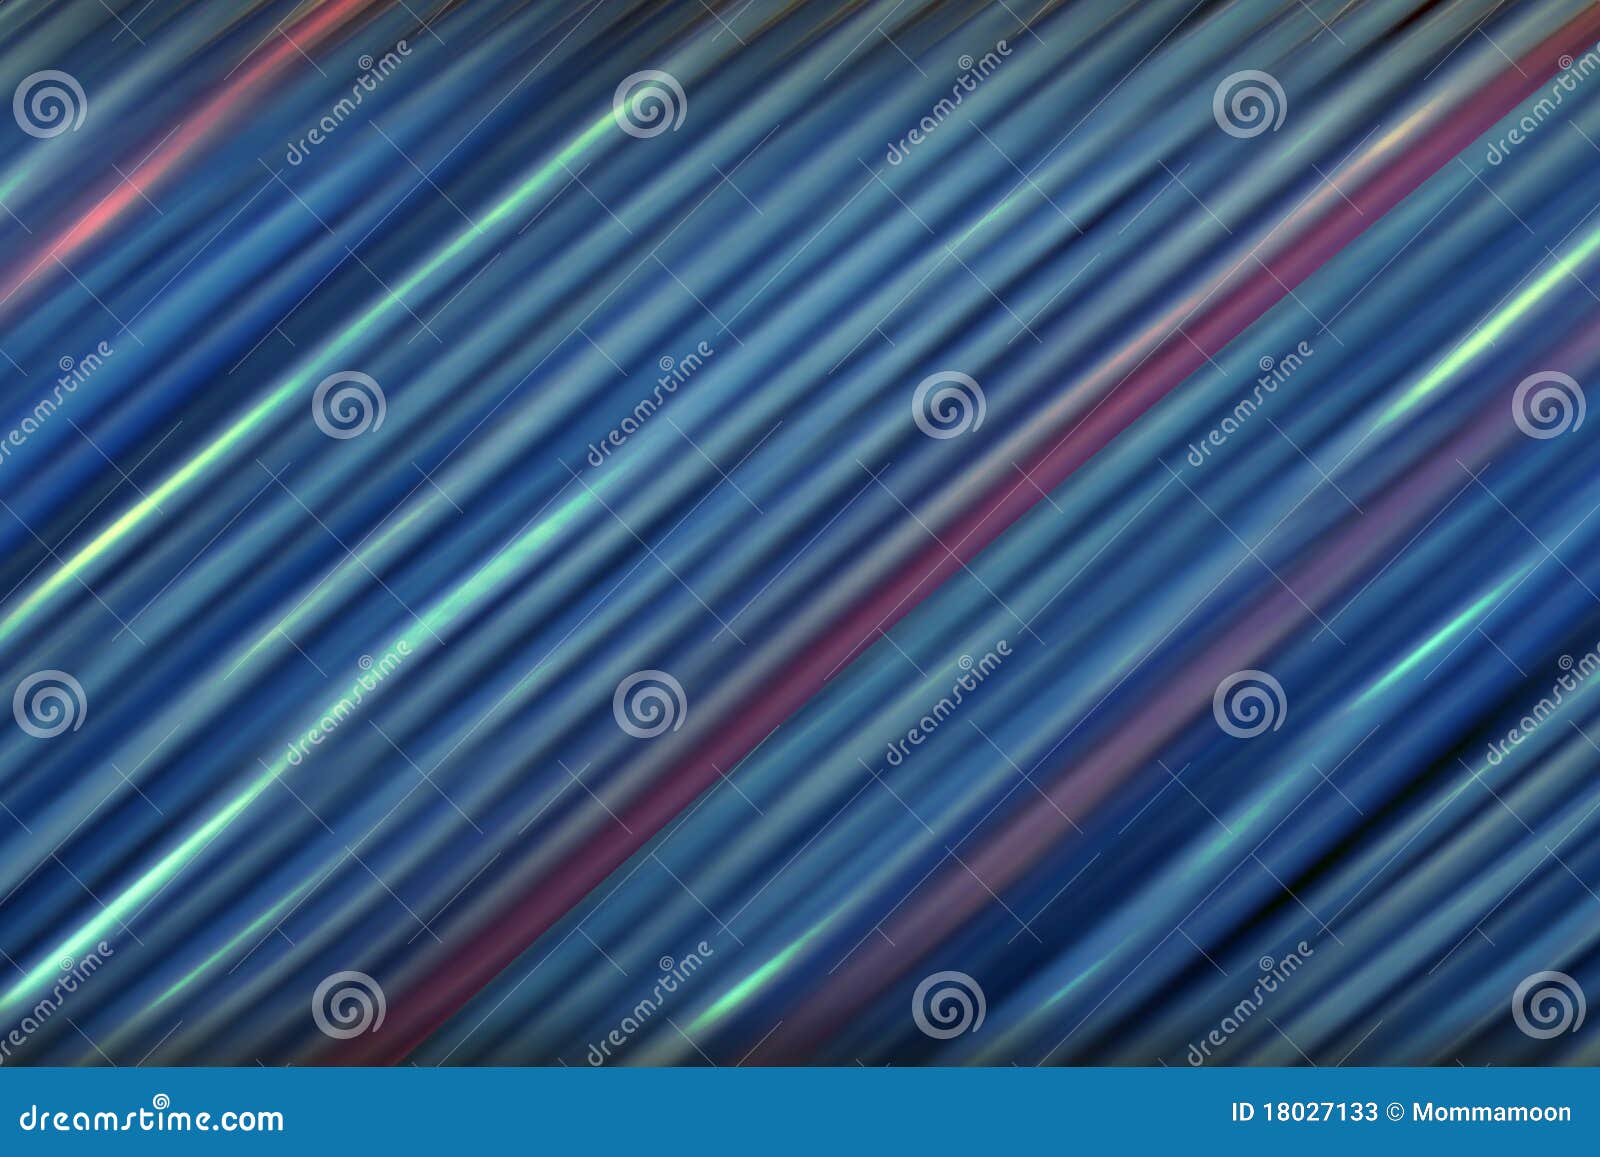 Diagonal Lines Color Pattern Stock Image - Image of home, striped: 18027133